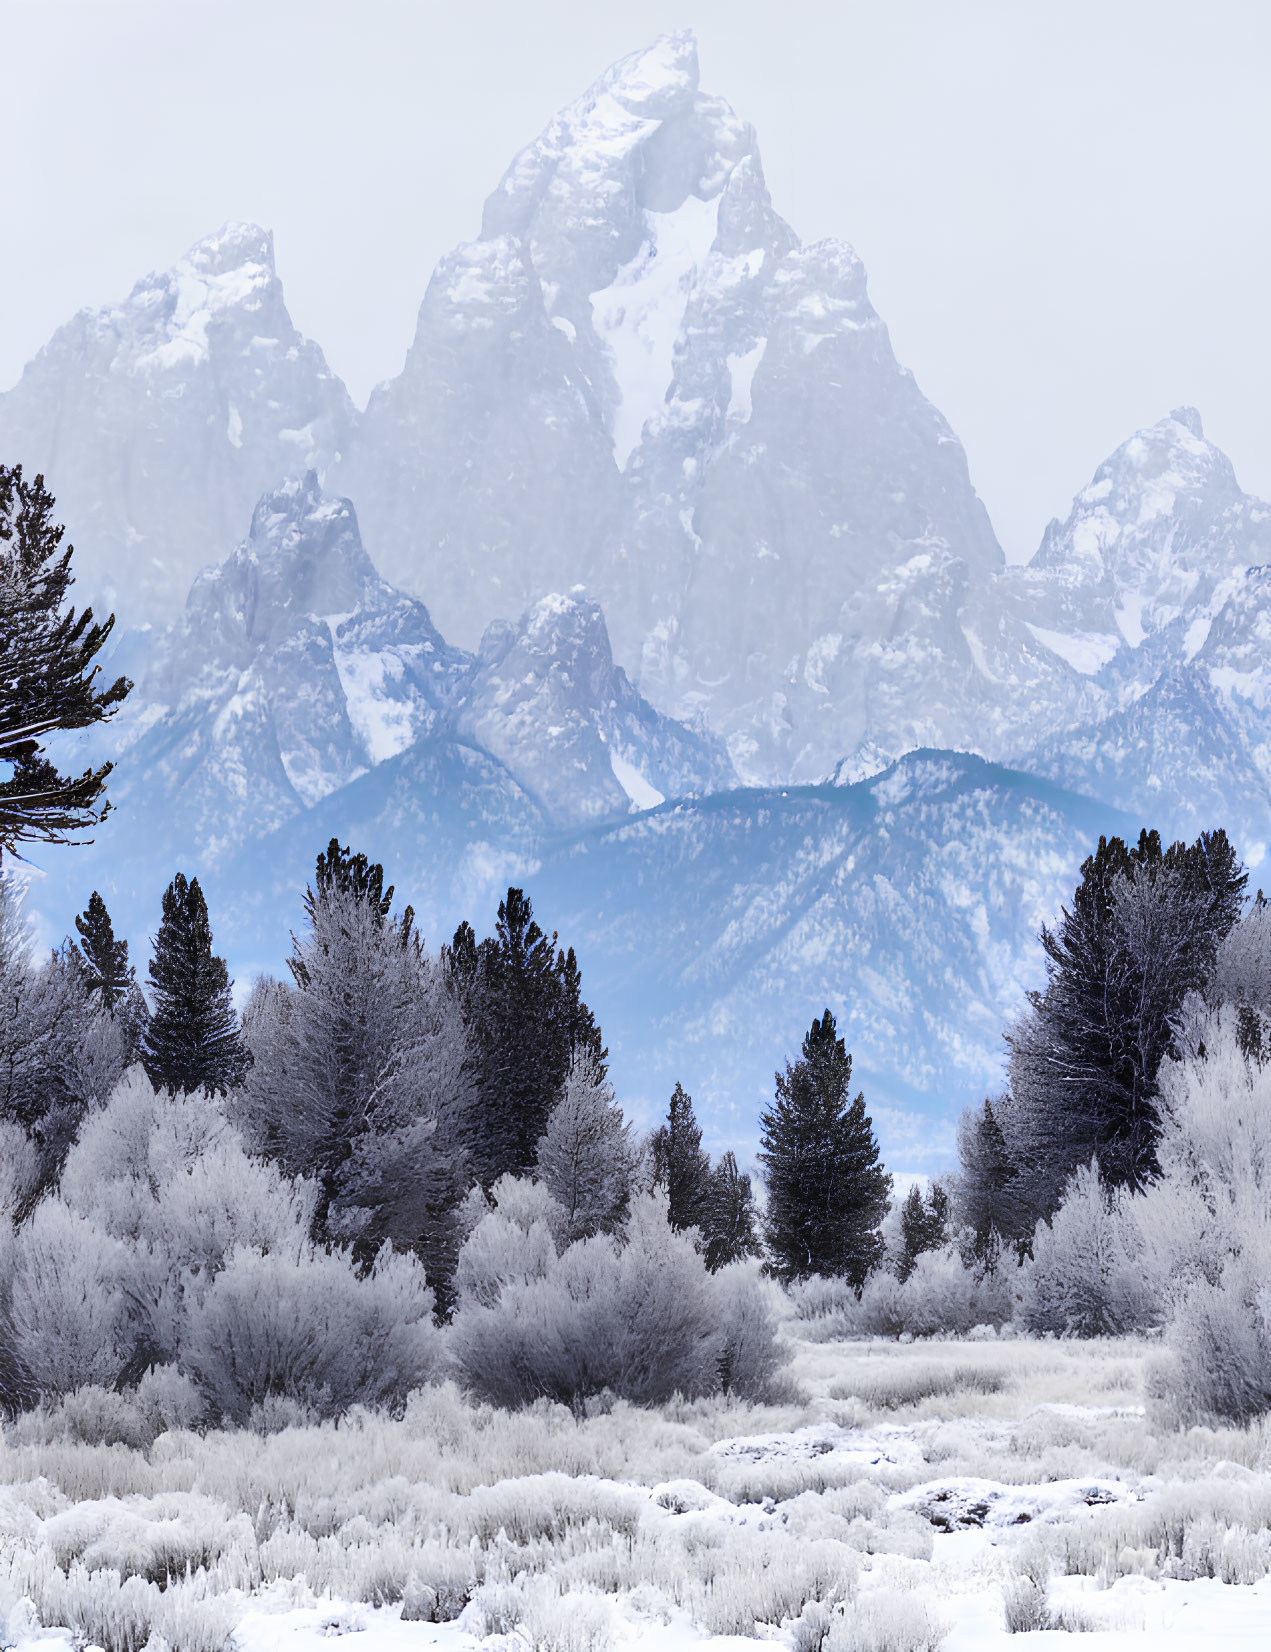 Winter scene with frosted trees and misty mountain peaks